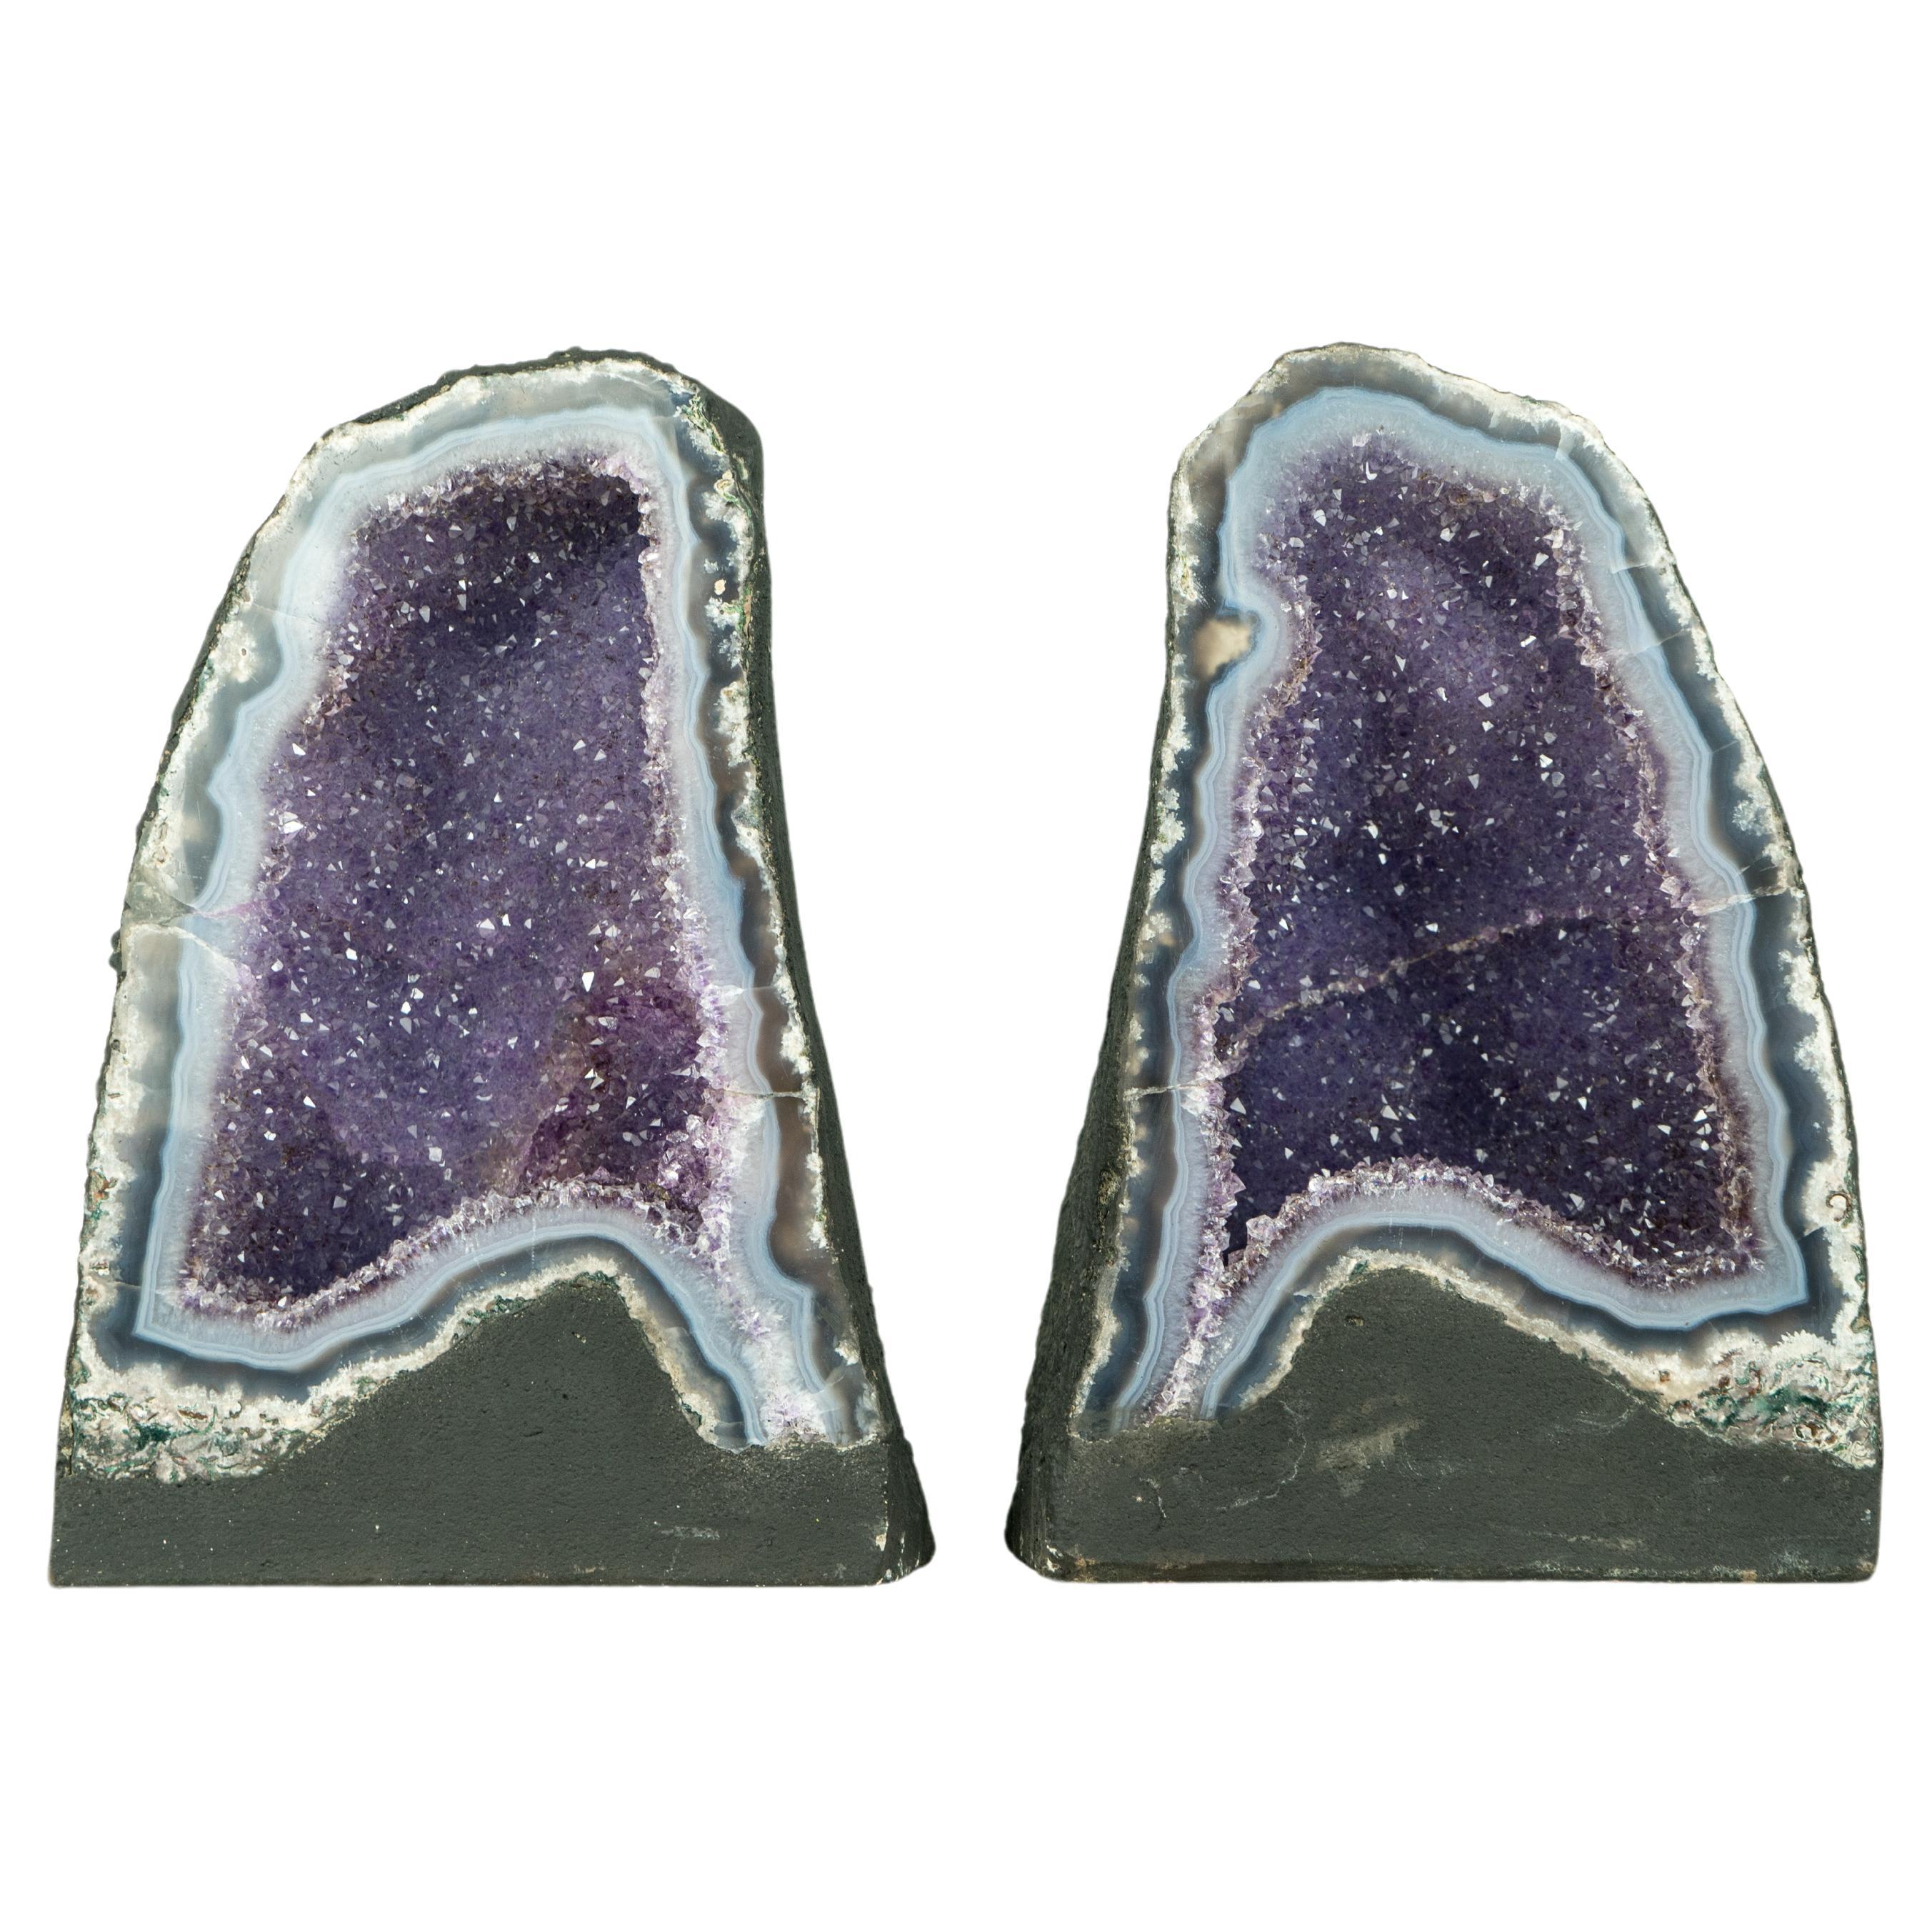 Pair of High-Grade Small Blue Lace Agate Geodes with Sparkly Lavender Amethyst For Sale